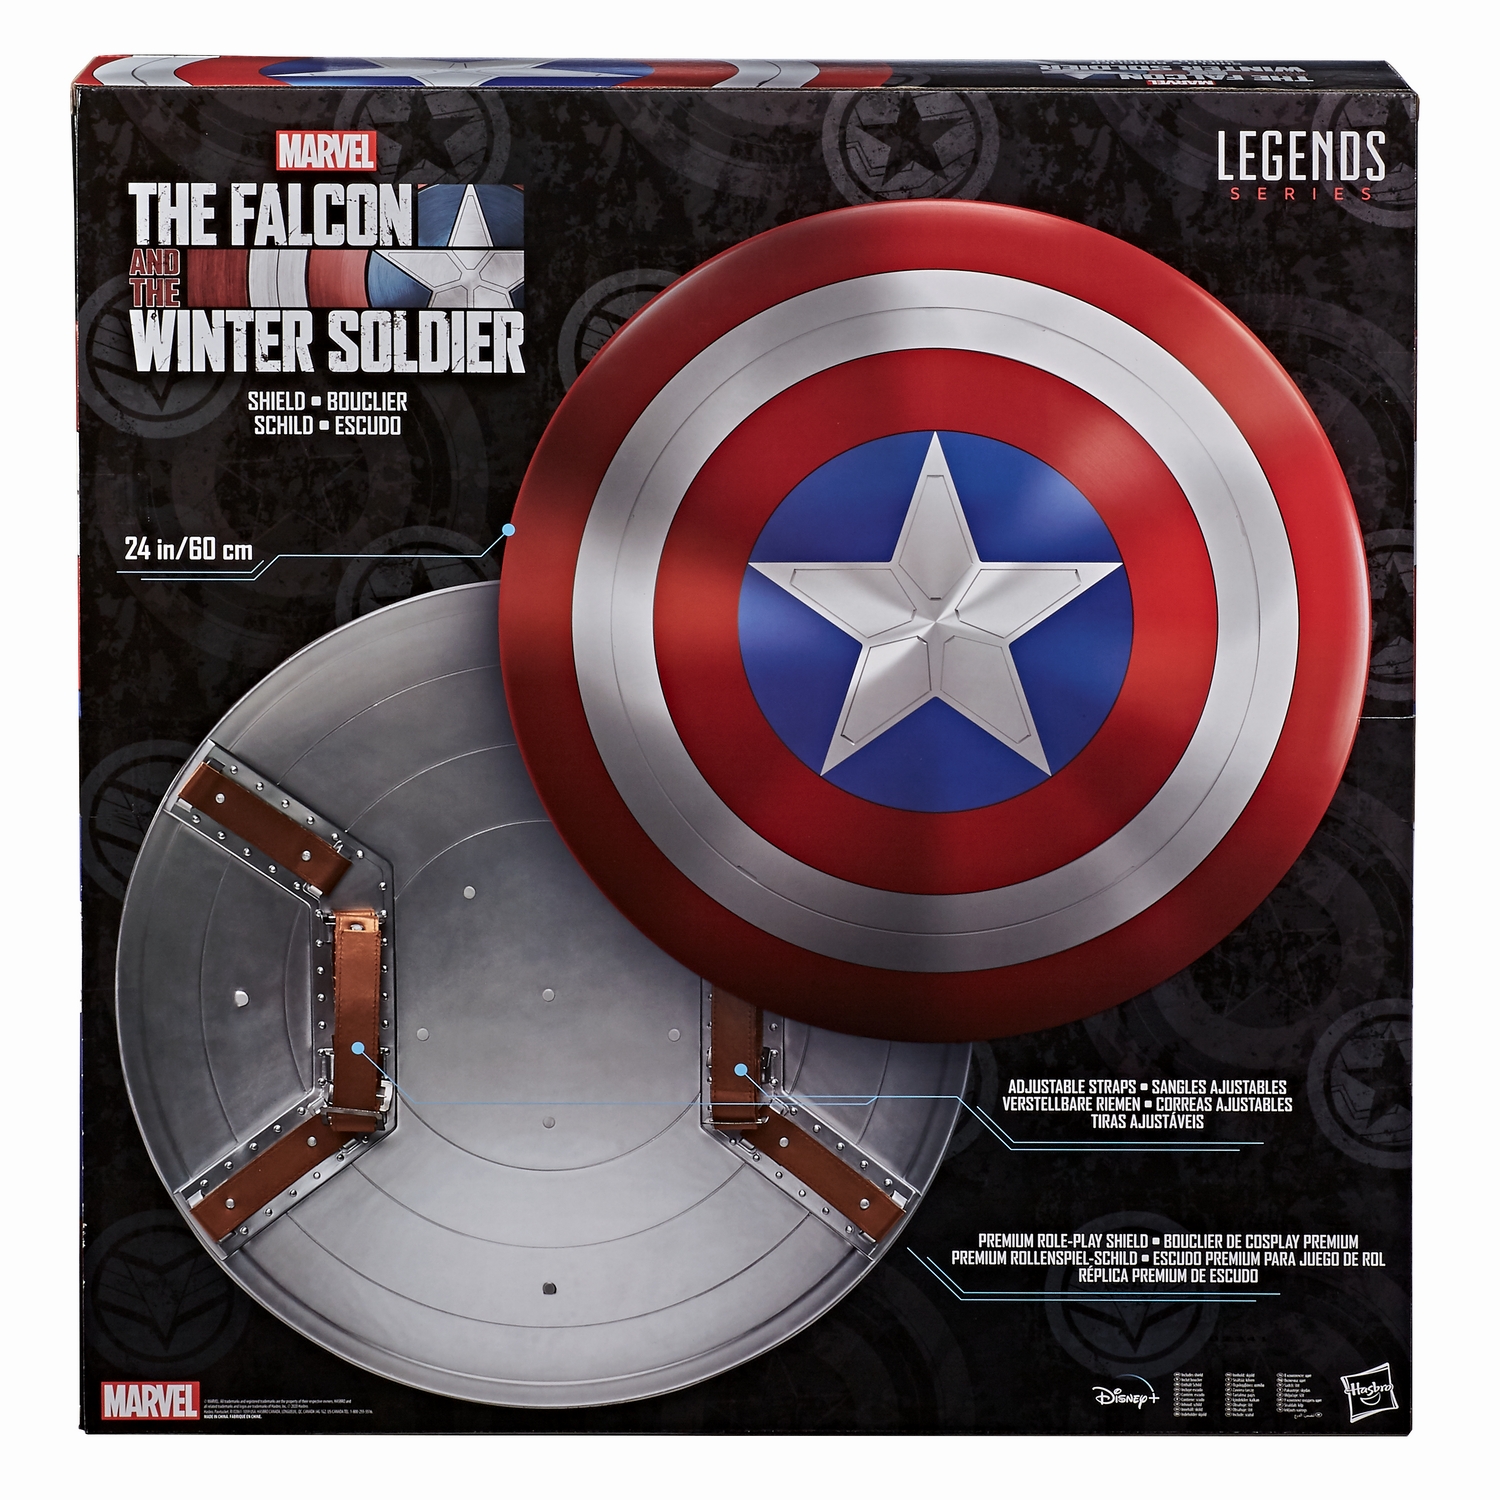 MARVEL LEGENDS SERIES THE FALCON & THE WINTER SOLDIER PREMIUM ROLE-PLAY SHIELD - pckging (1).jpg